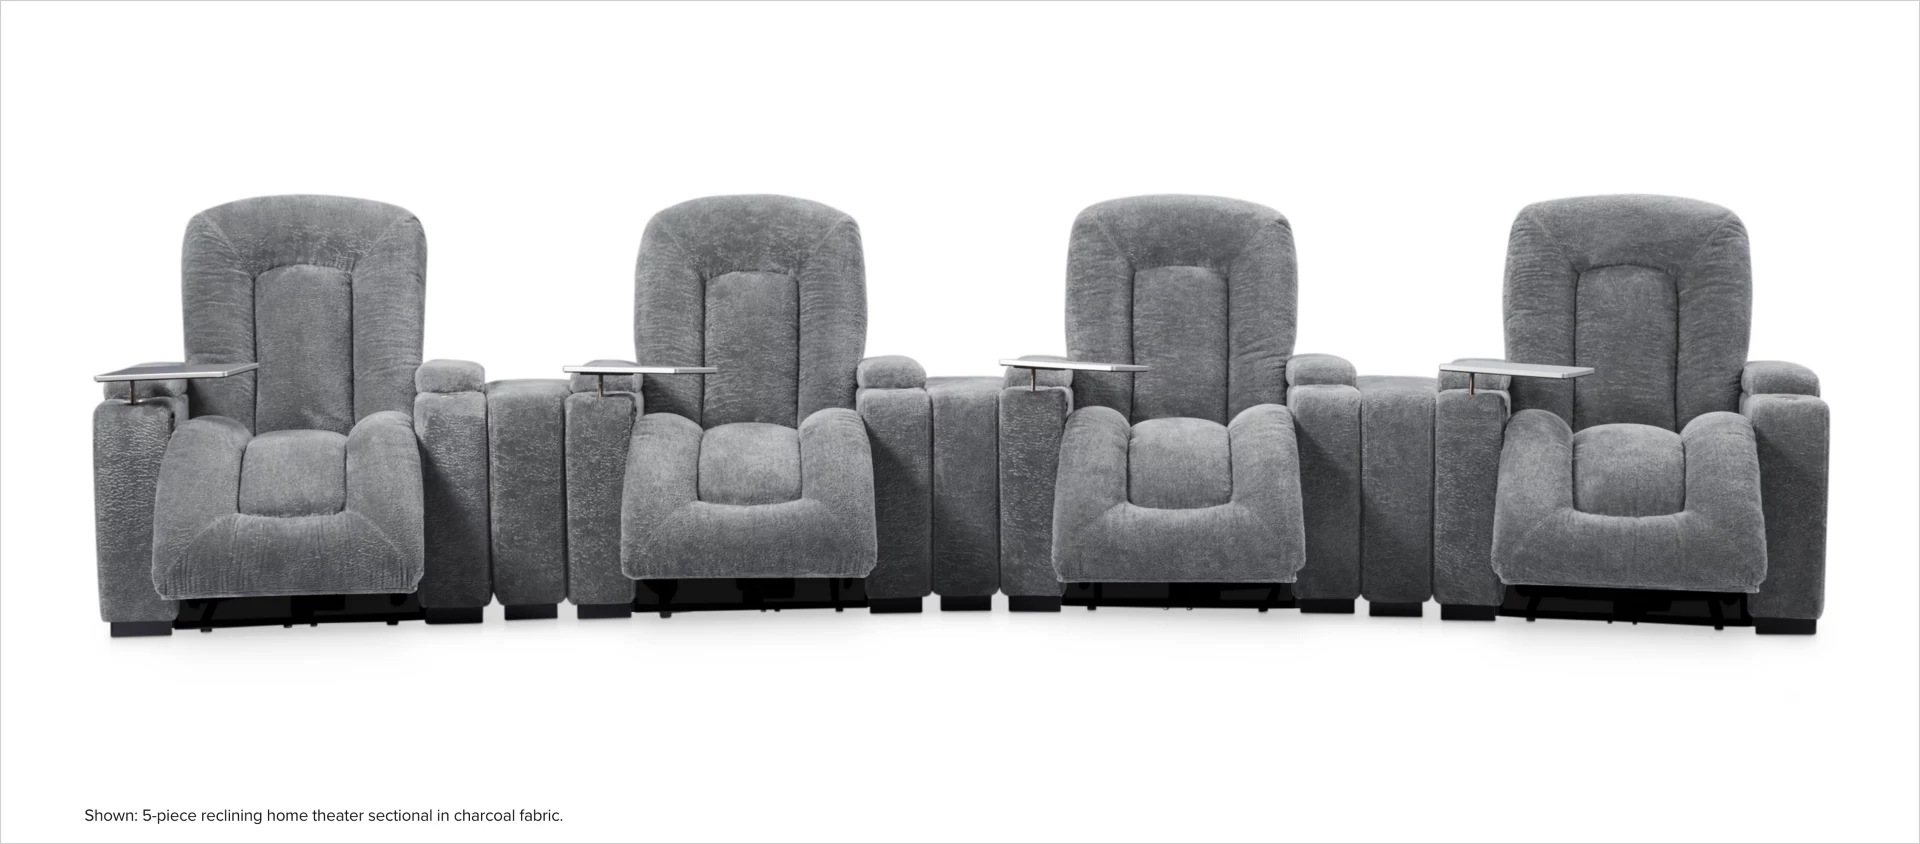 Rory 5-piece reclining home theater sectional in charcoal fabric.